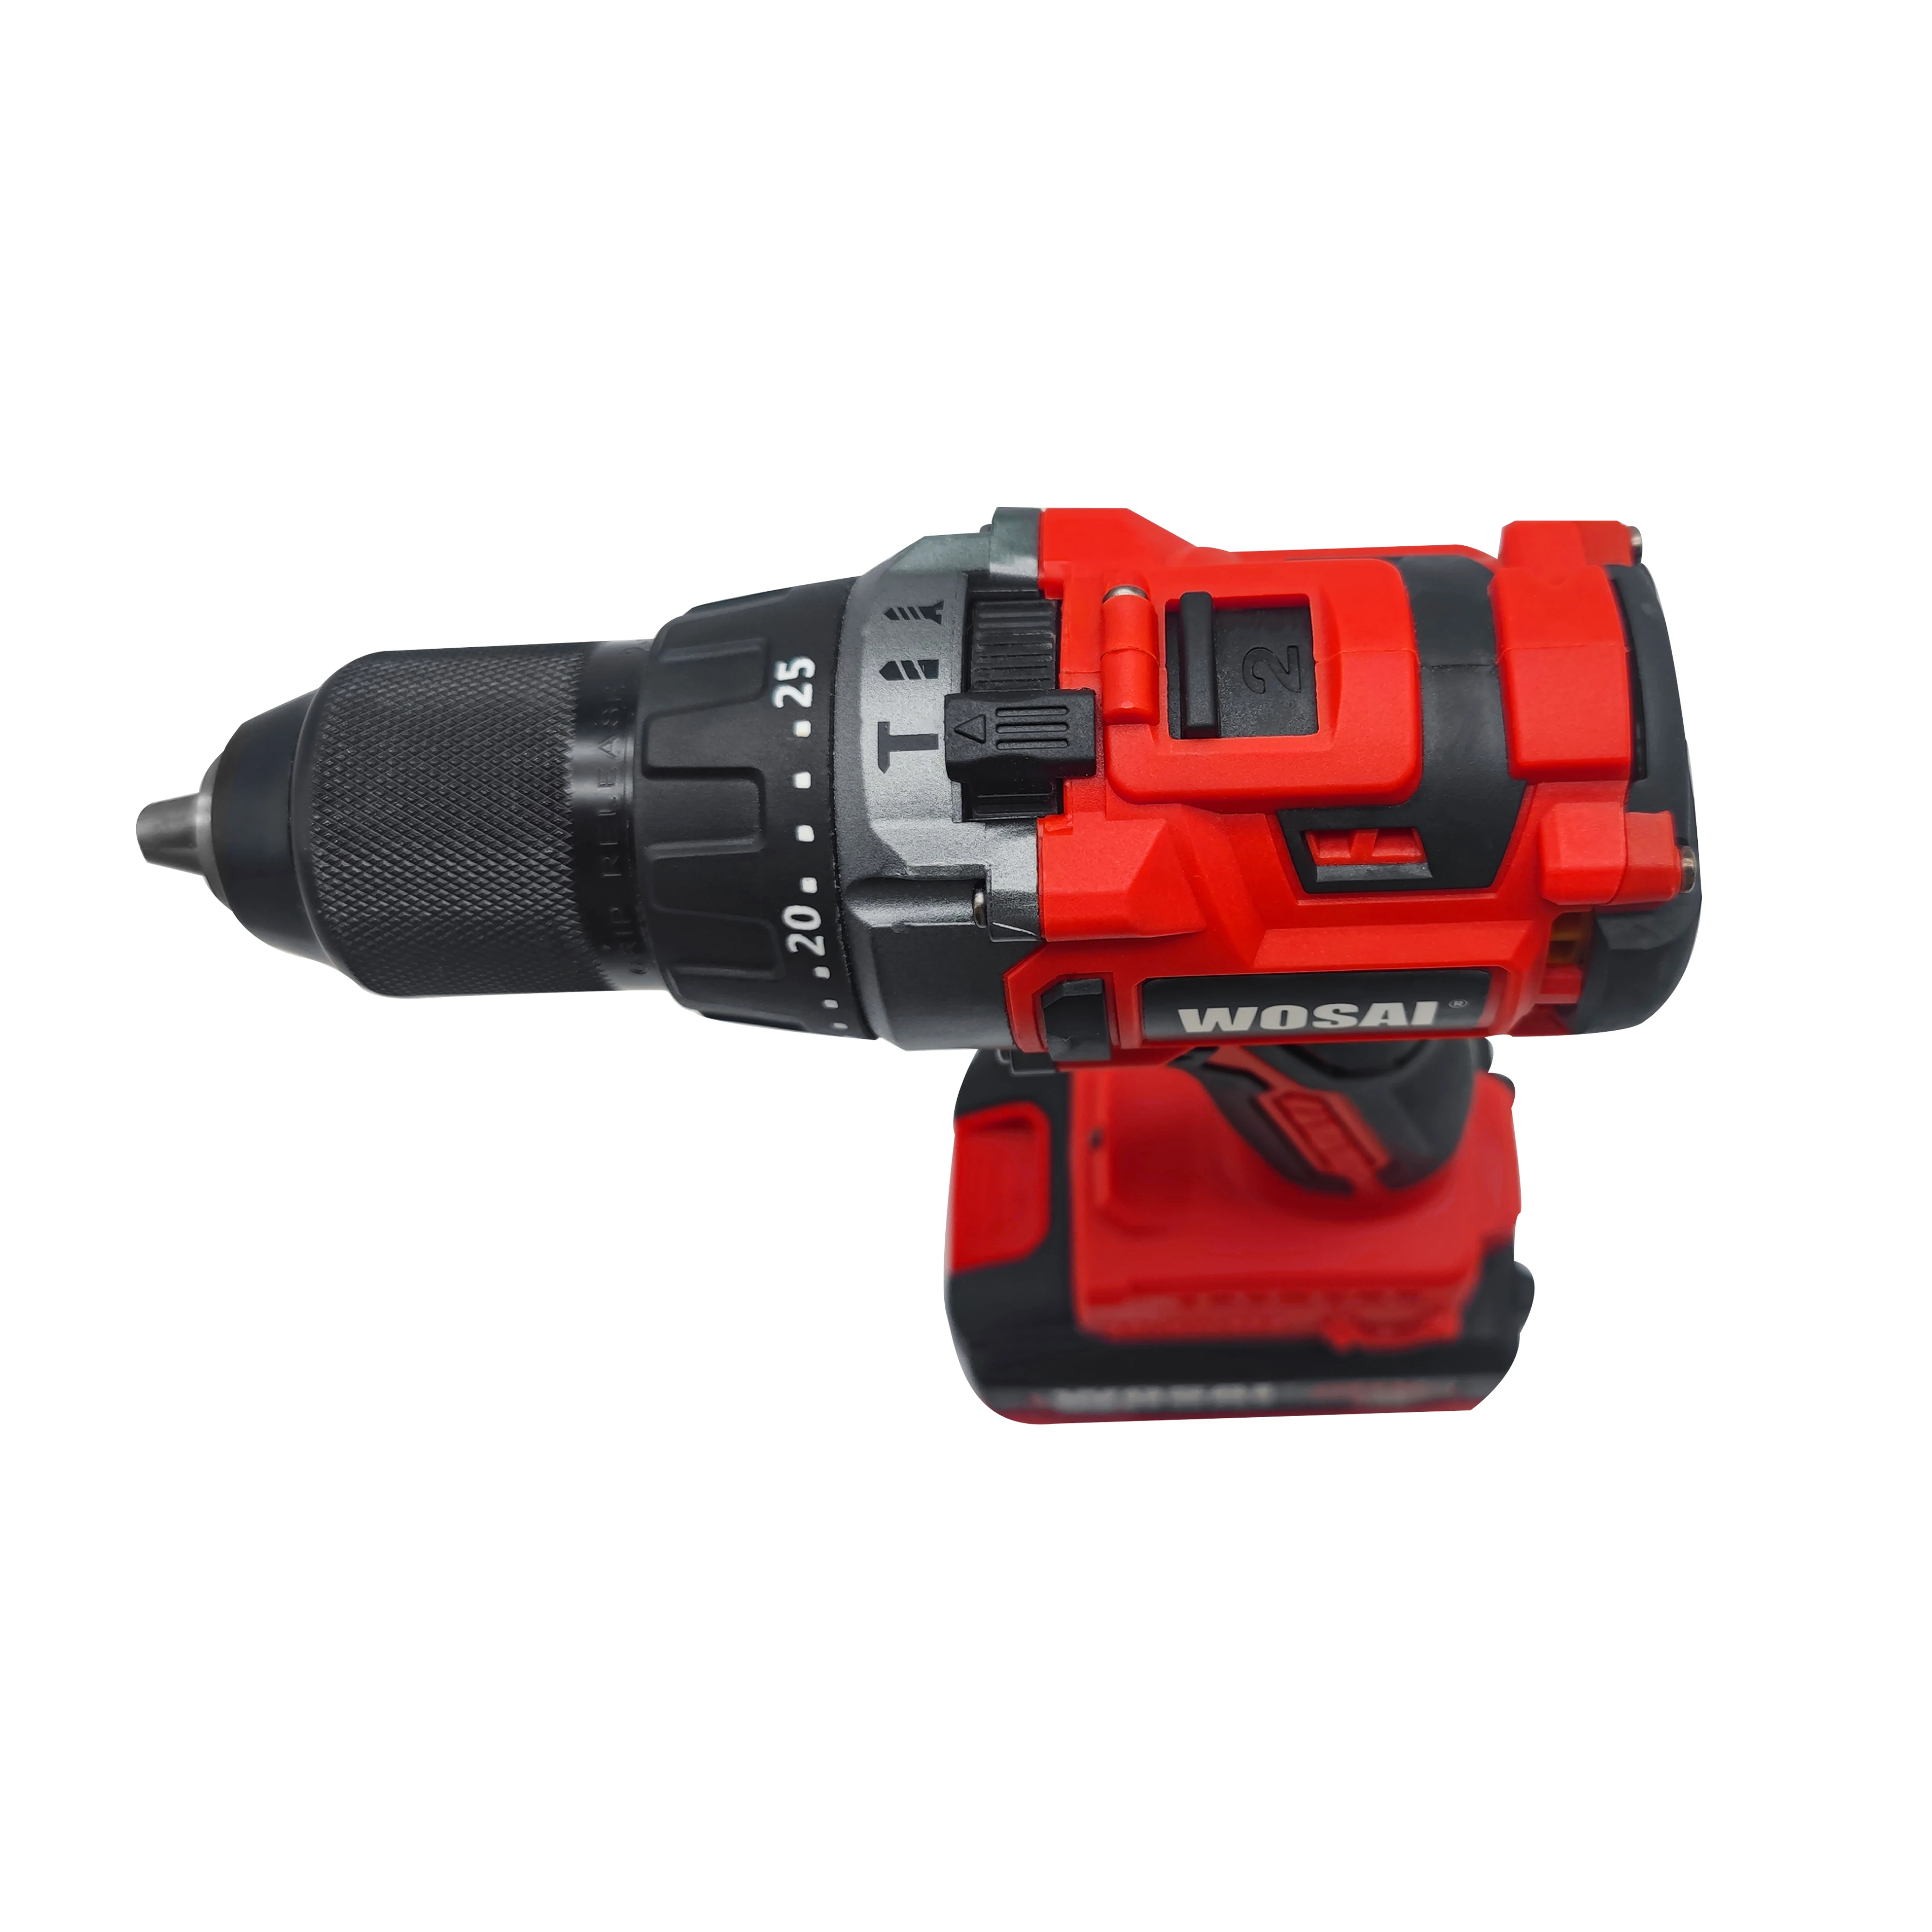 Wosai 20V Brushless Cordless Drill Tool 13mm Hammer Drill Driver and Shipping，without battery